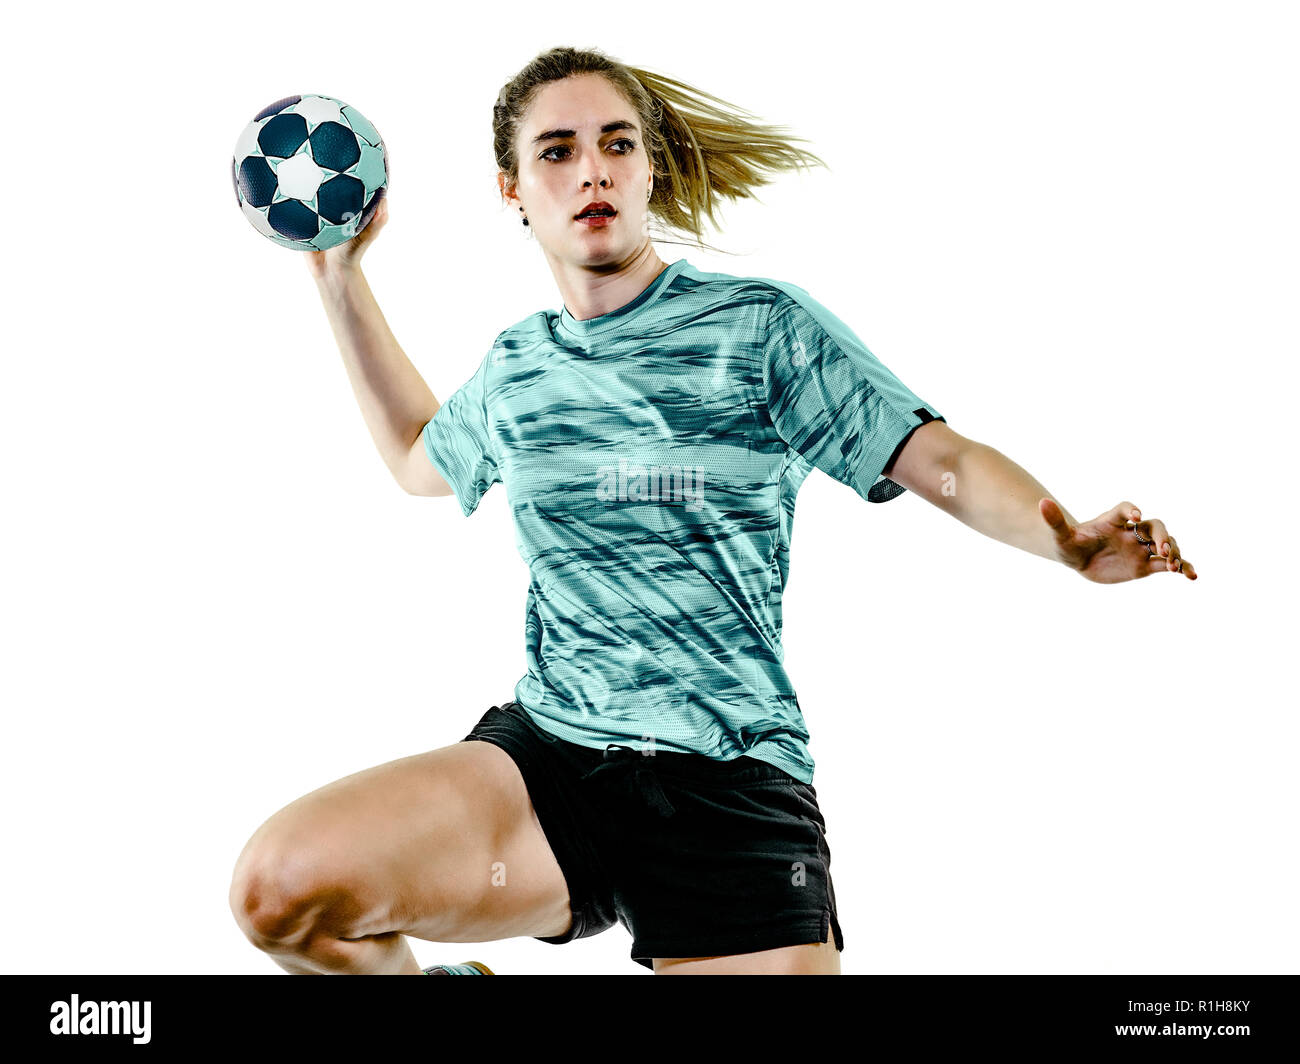 one caucasian young teenager girl woman playing Handball player isolated on white background Stock Photo